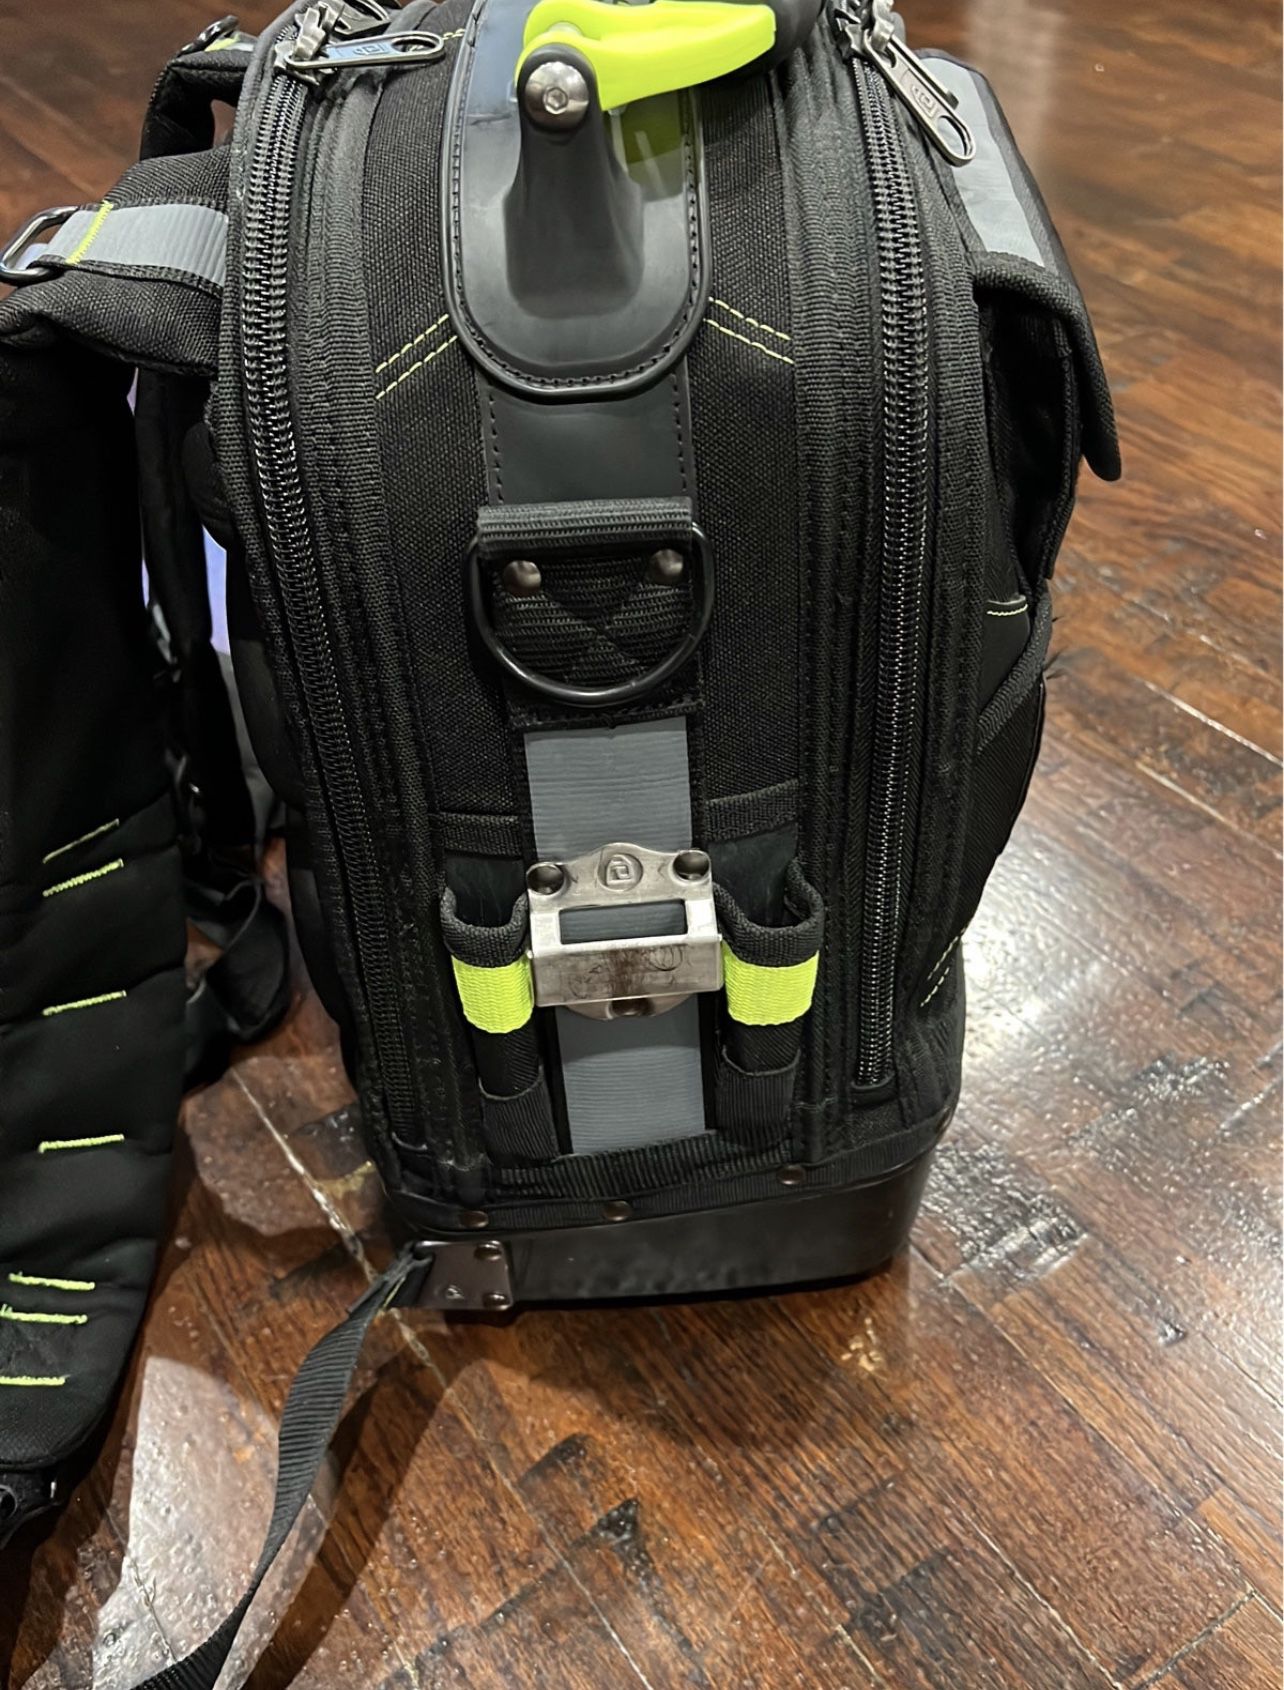 Veto Pro PAC Tech-LC for Sale in Houston, TX - OfferUp